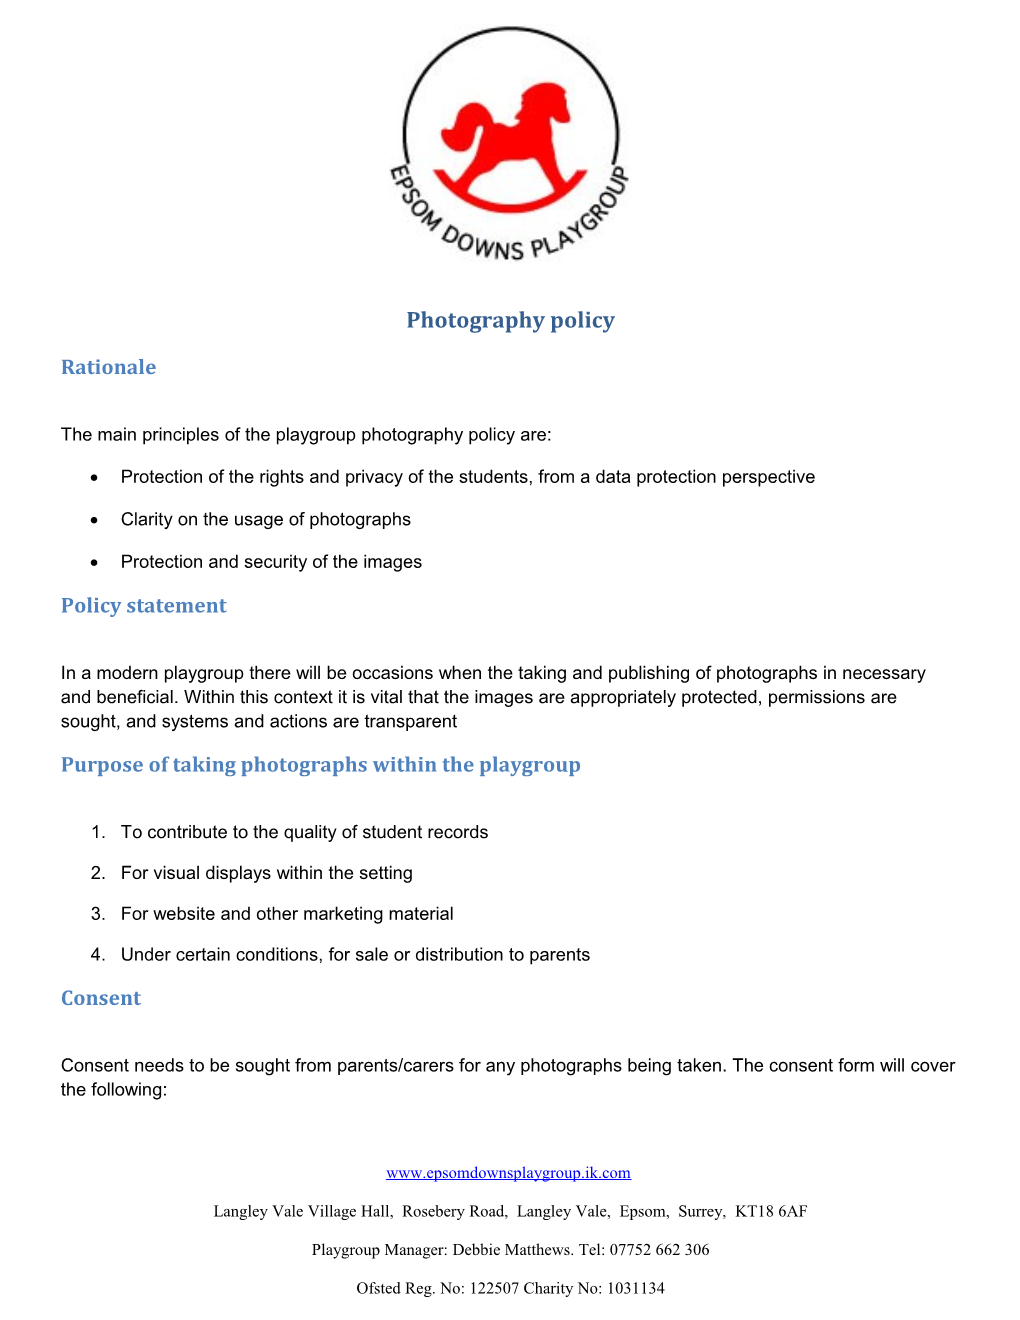 The Main Principles of the Playgroup Photography Policy Are